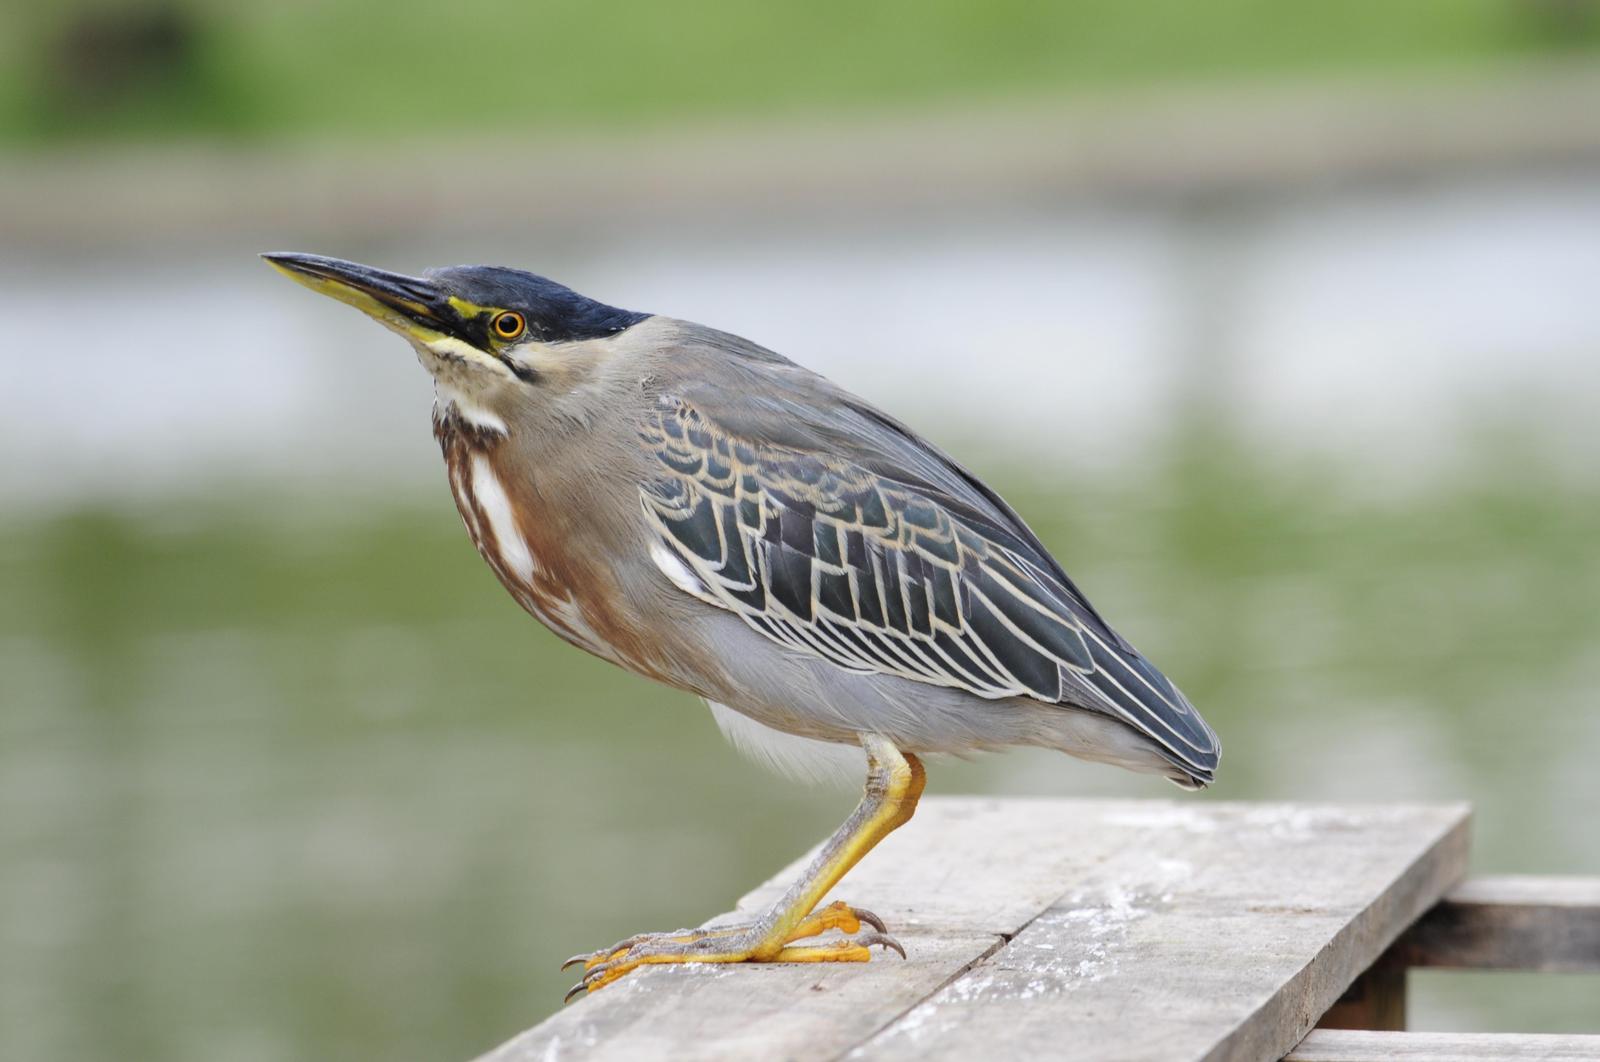 Striated Heron Photo by Priscila Couto